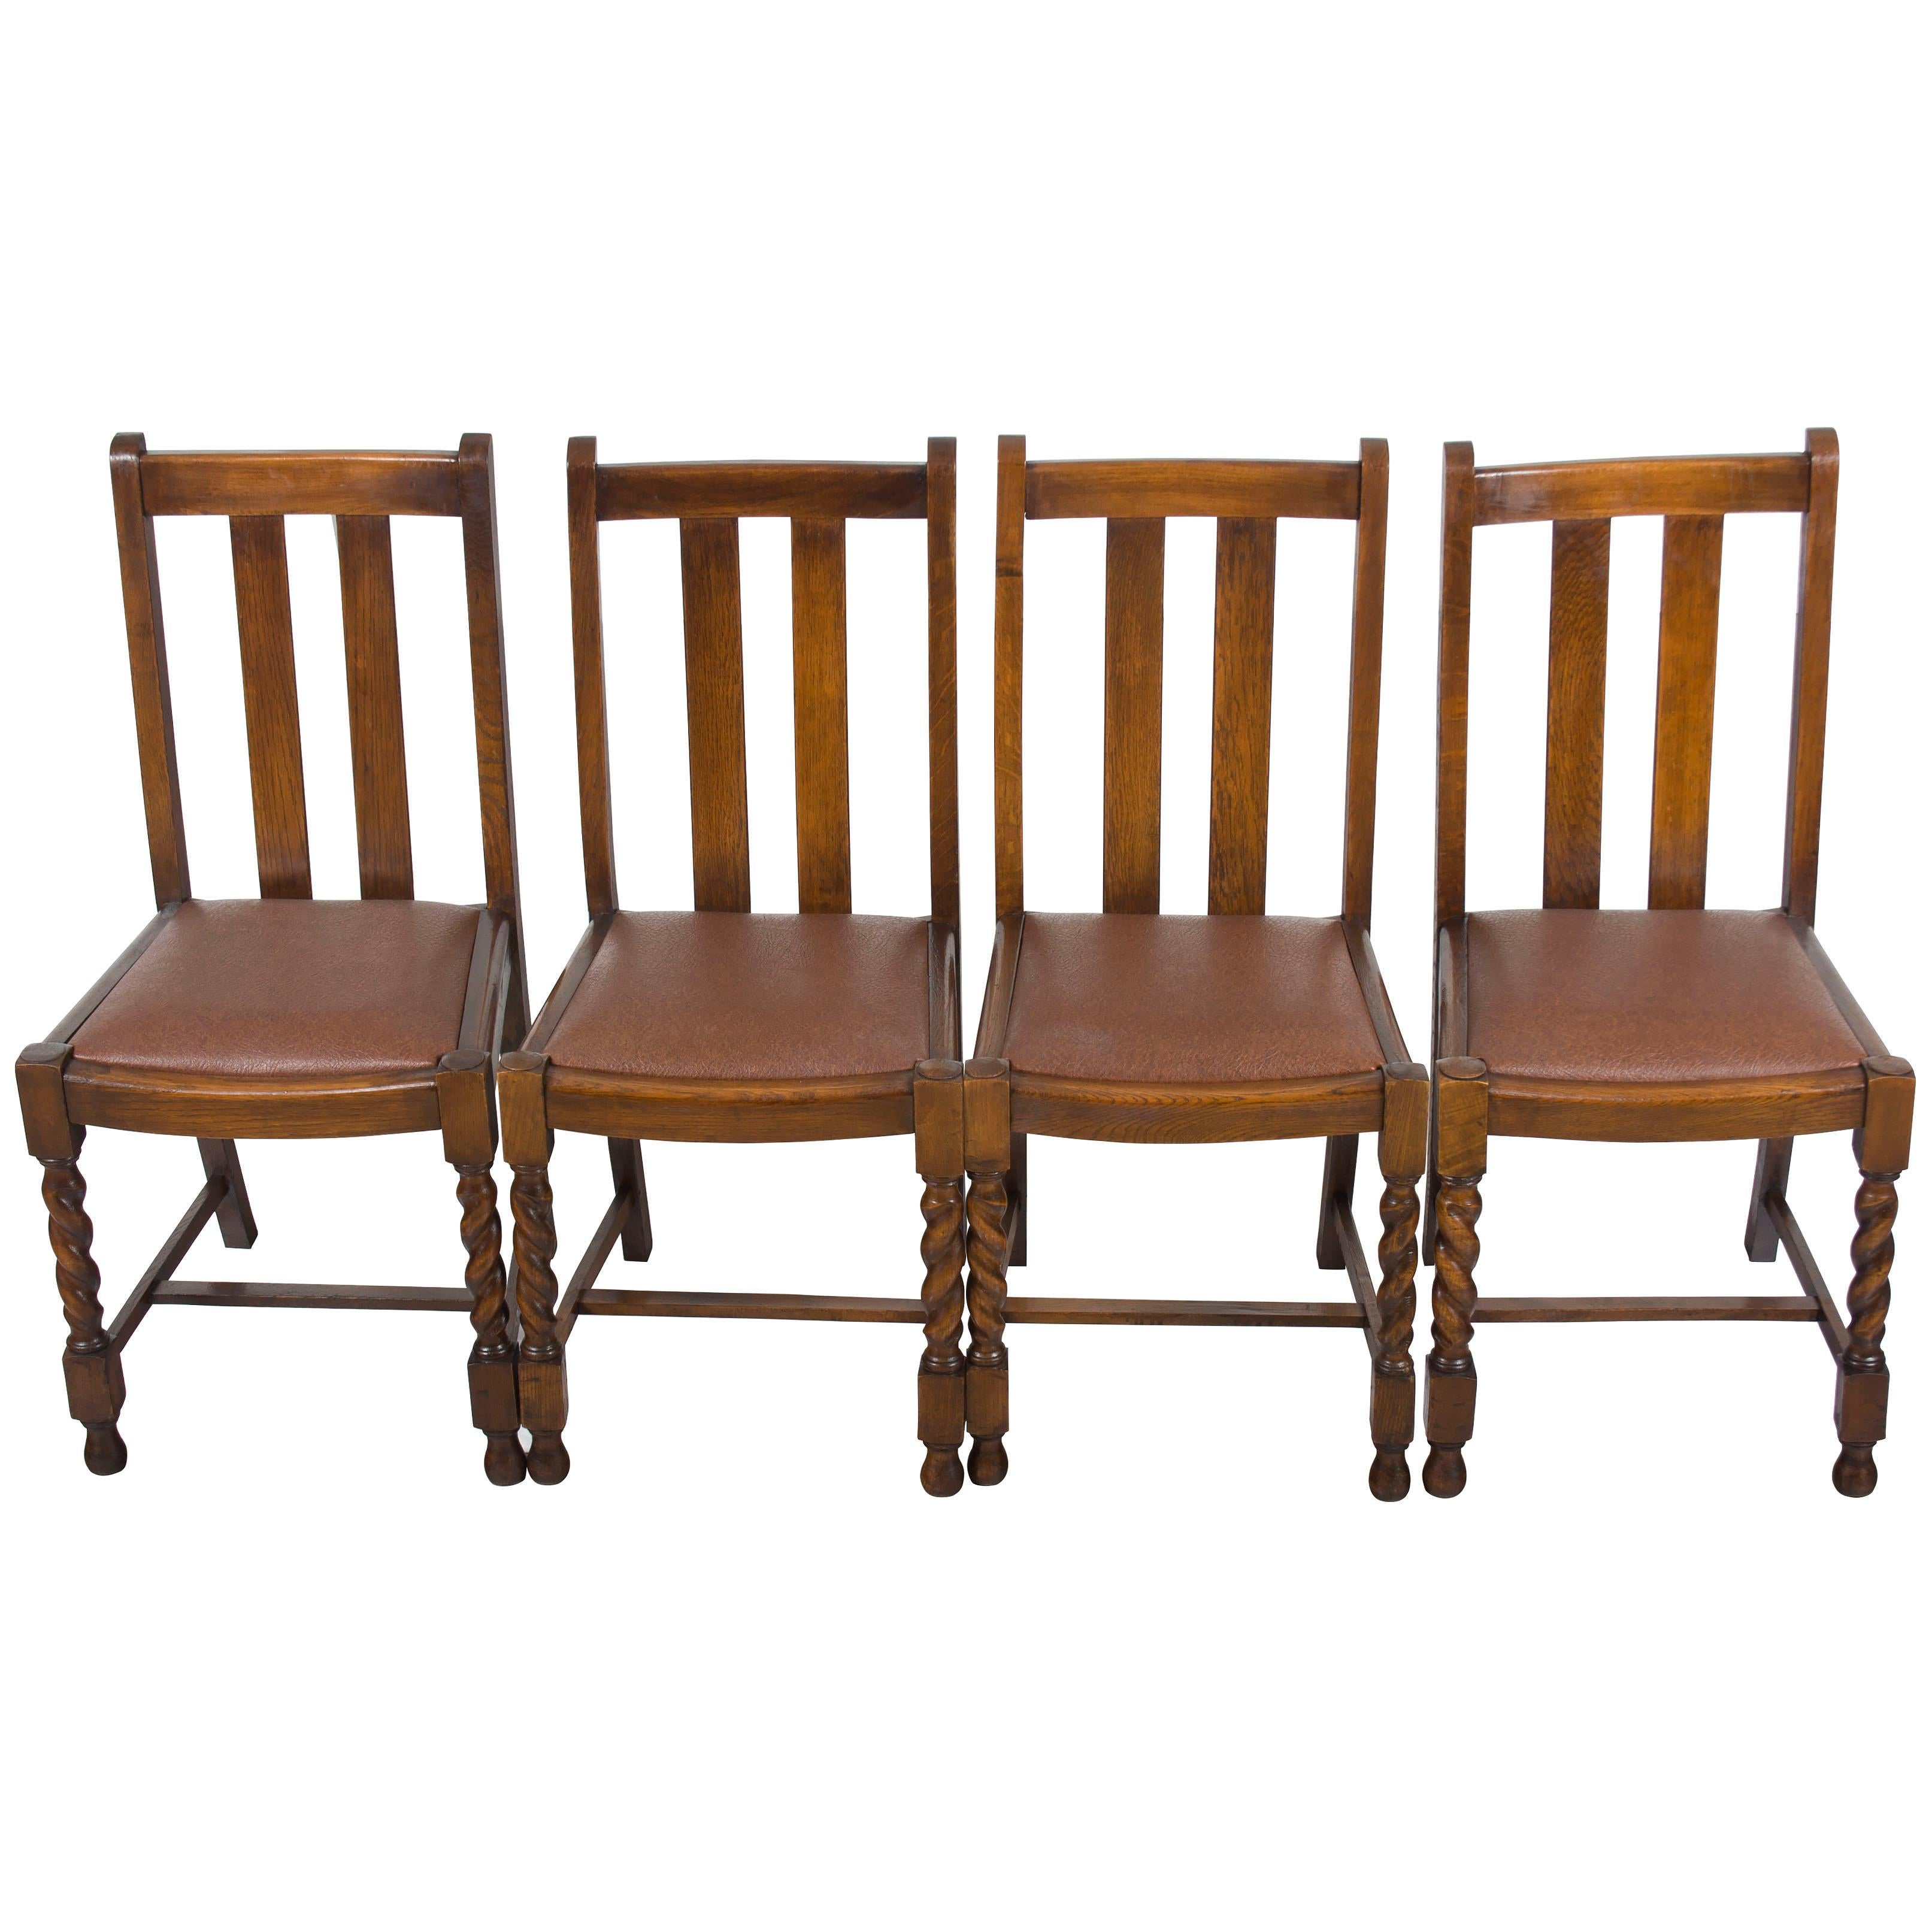 Set of Four Oak Barley Twist Dining Room Kitchen or Game Chairs w Leather Seats For Sale